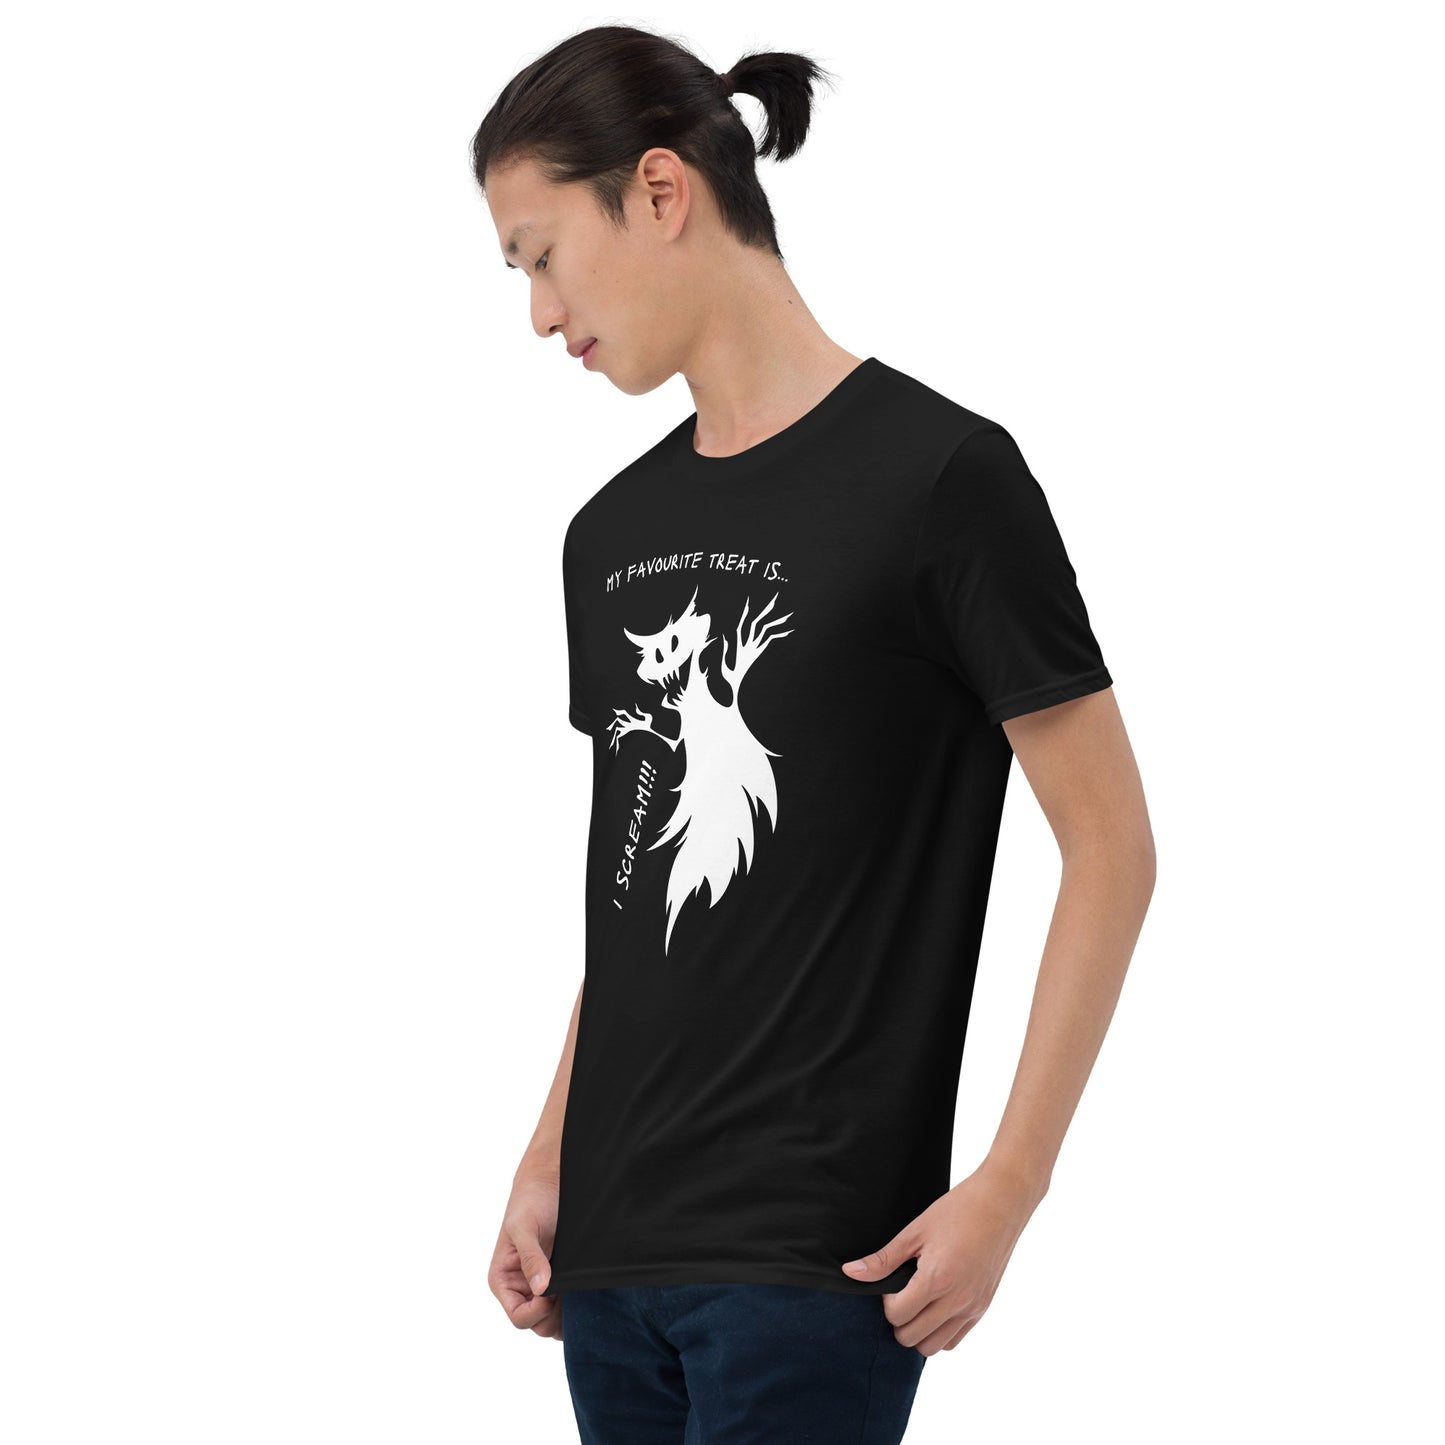 My Favorite Treat is ... I Scream, Short-Sleeve Unisex T-Shirt with a Ghost